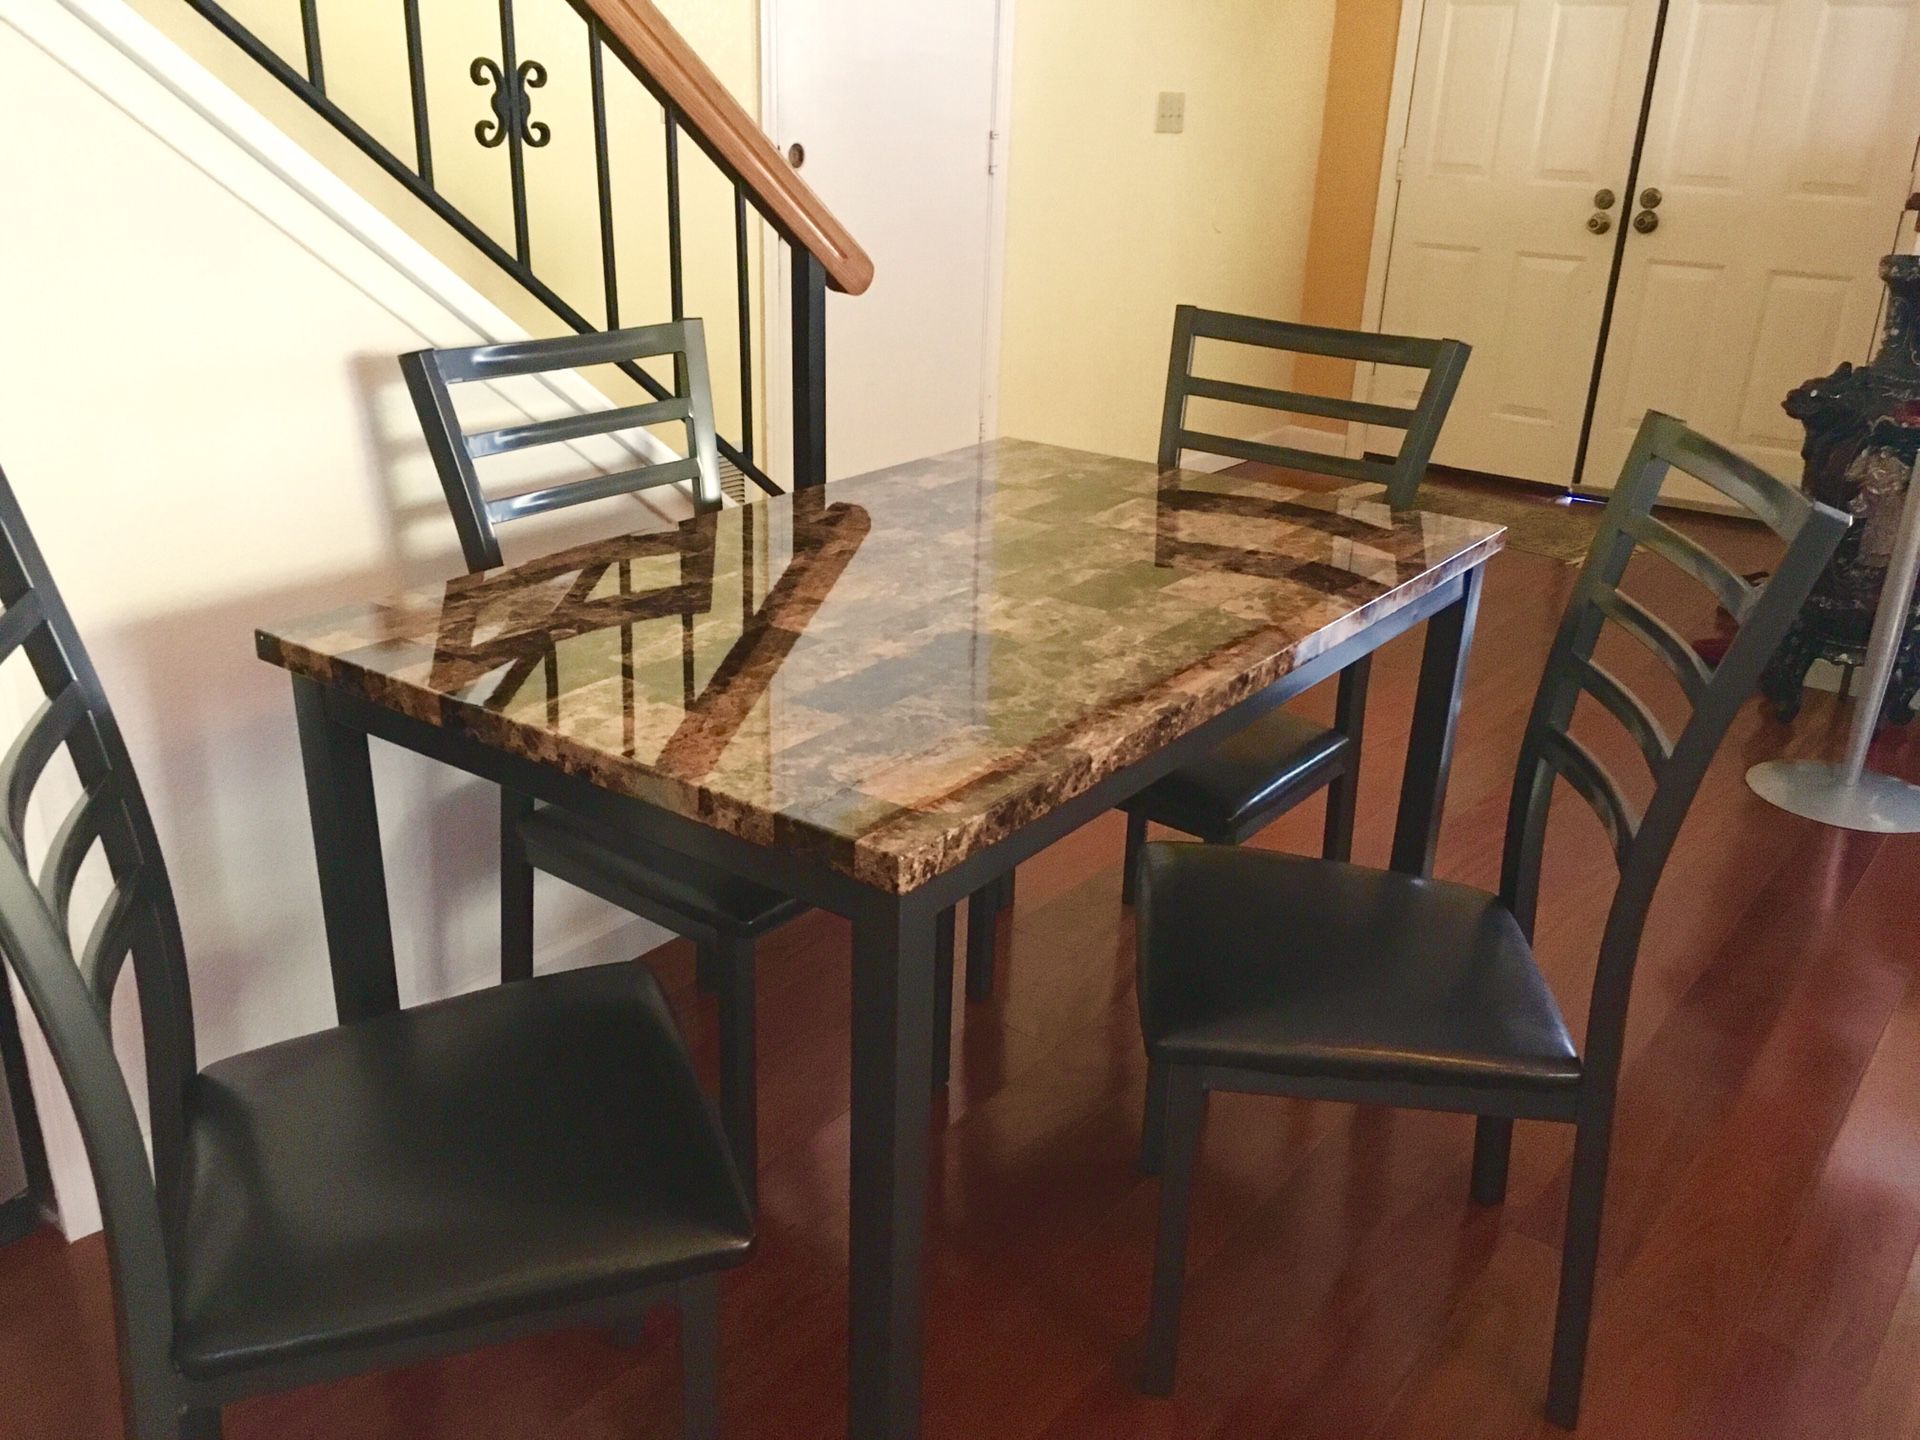 Brand new dining table with 4 chairs. Free curbside delivery included